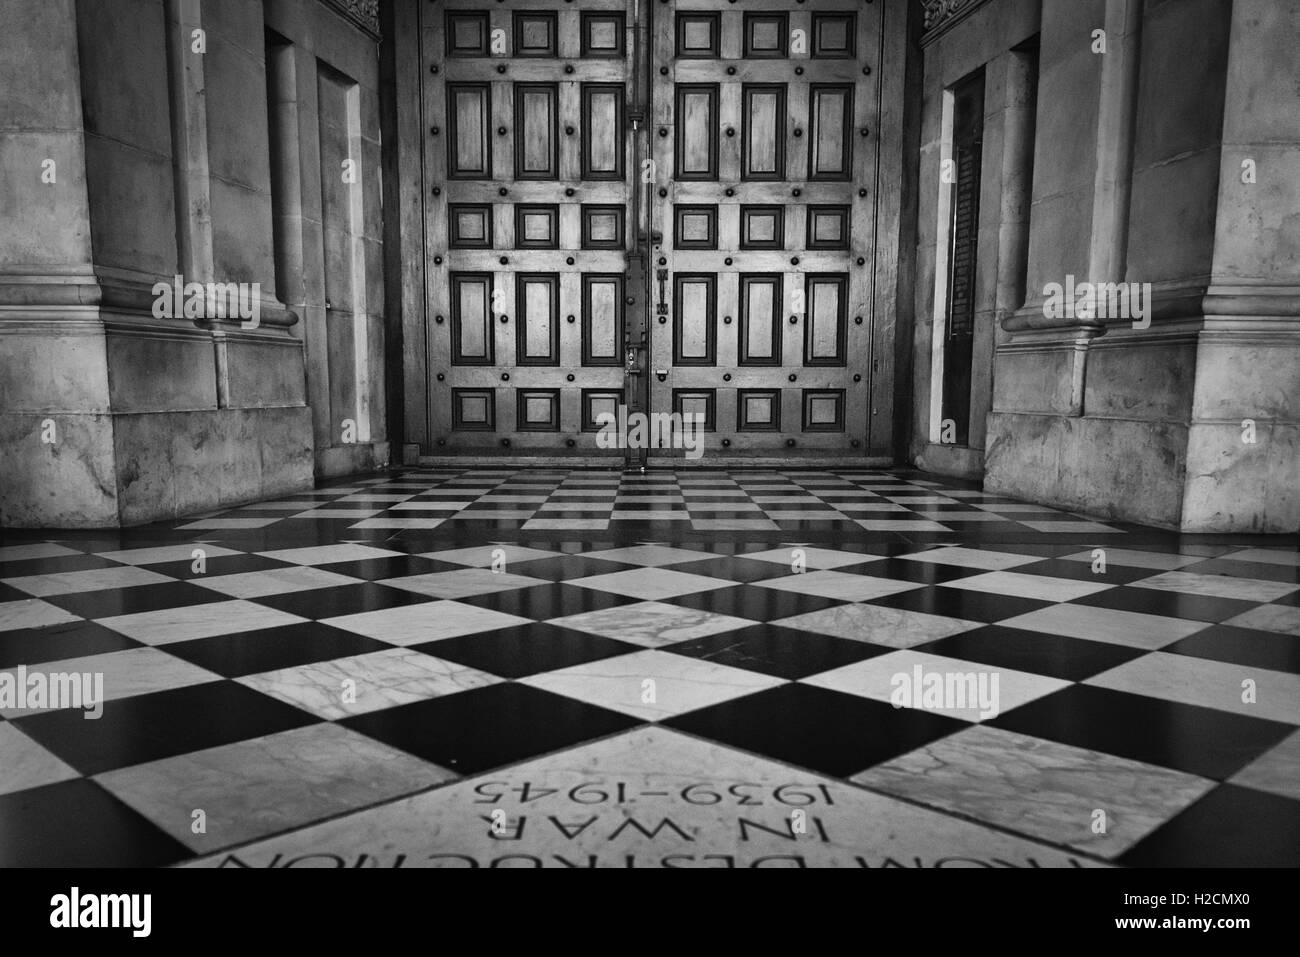 Wooden doors of St. Paul's Cathedral and square floor tiles in London. Stock Photo